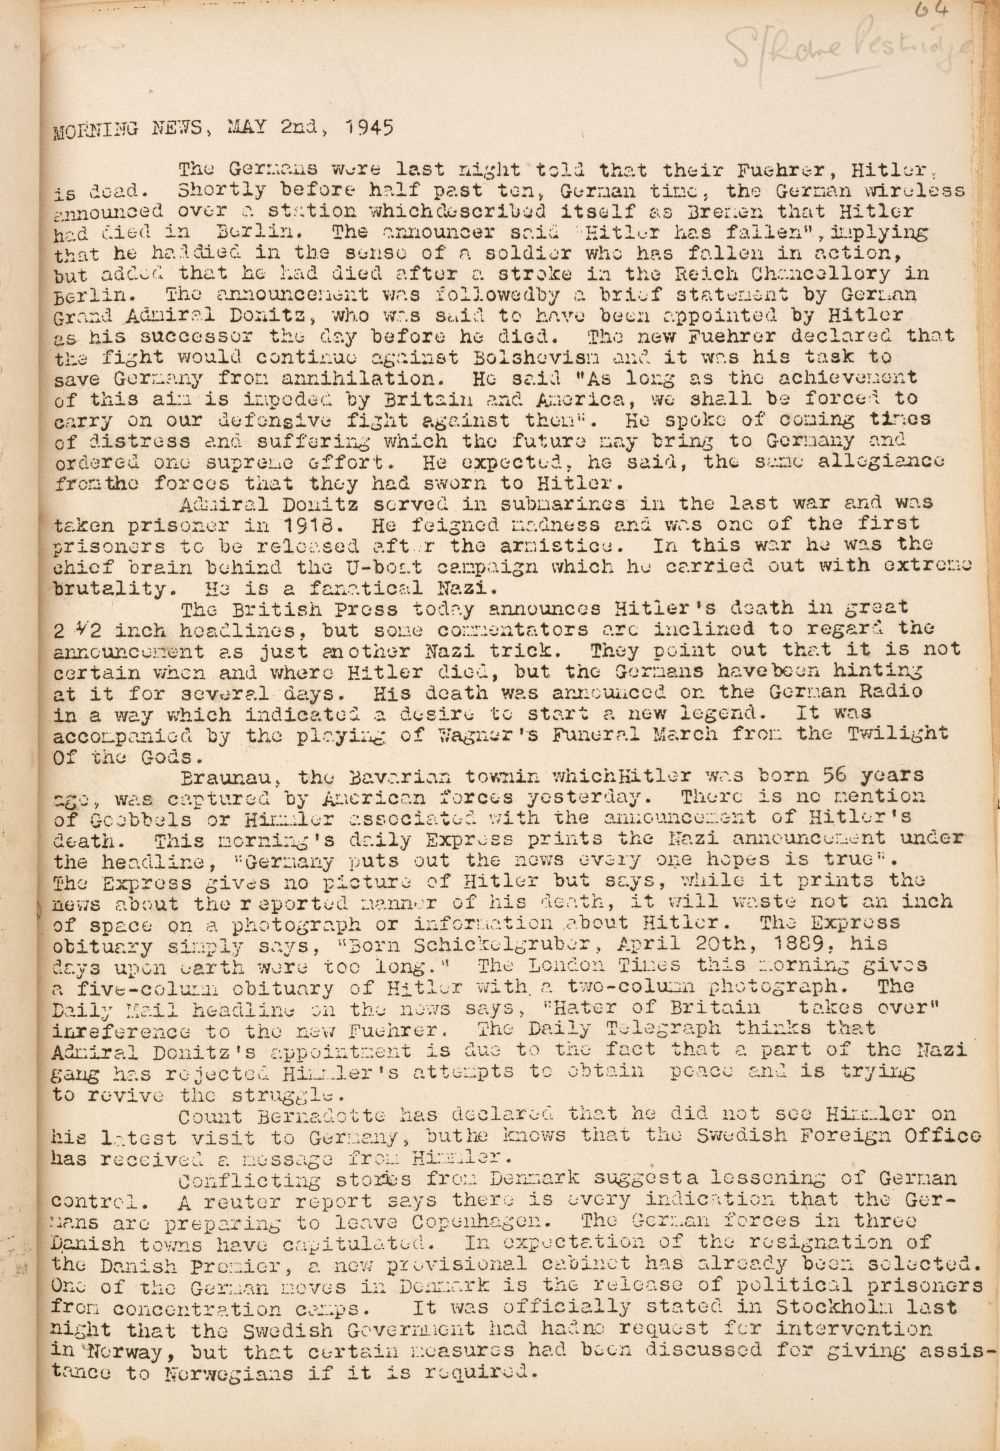 Lot 320 - Stalag III-A. Camp News Service of Stalag III-A at Luckenwalder, 25 April to 19 May 1945